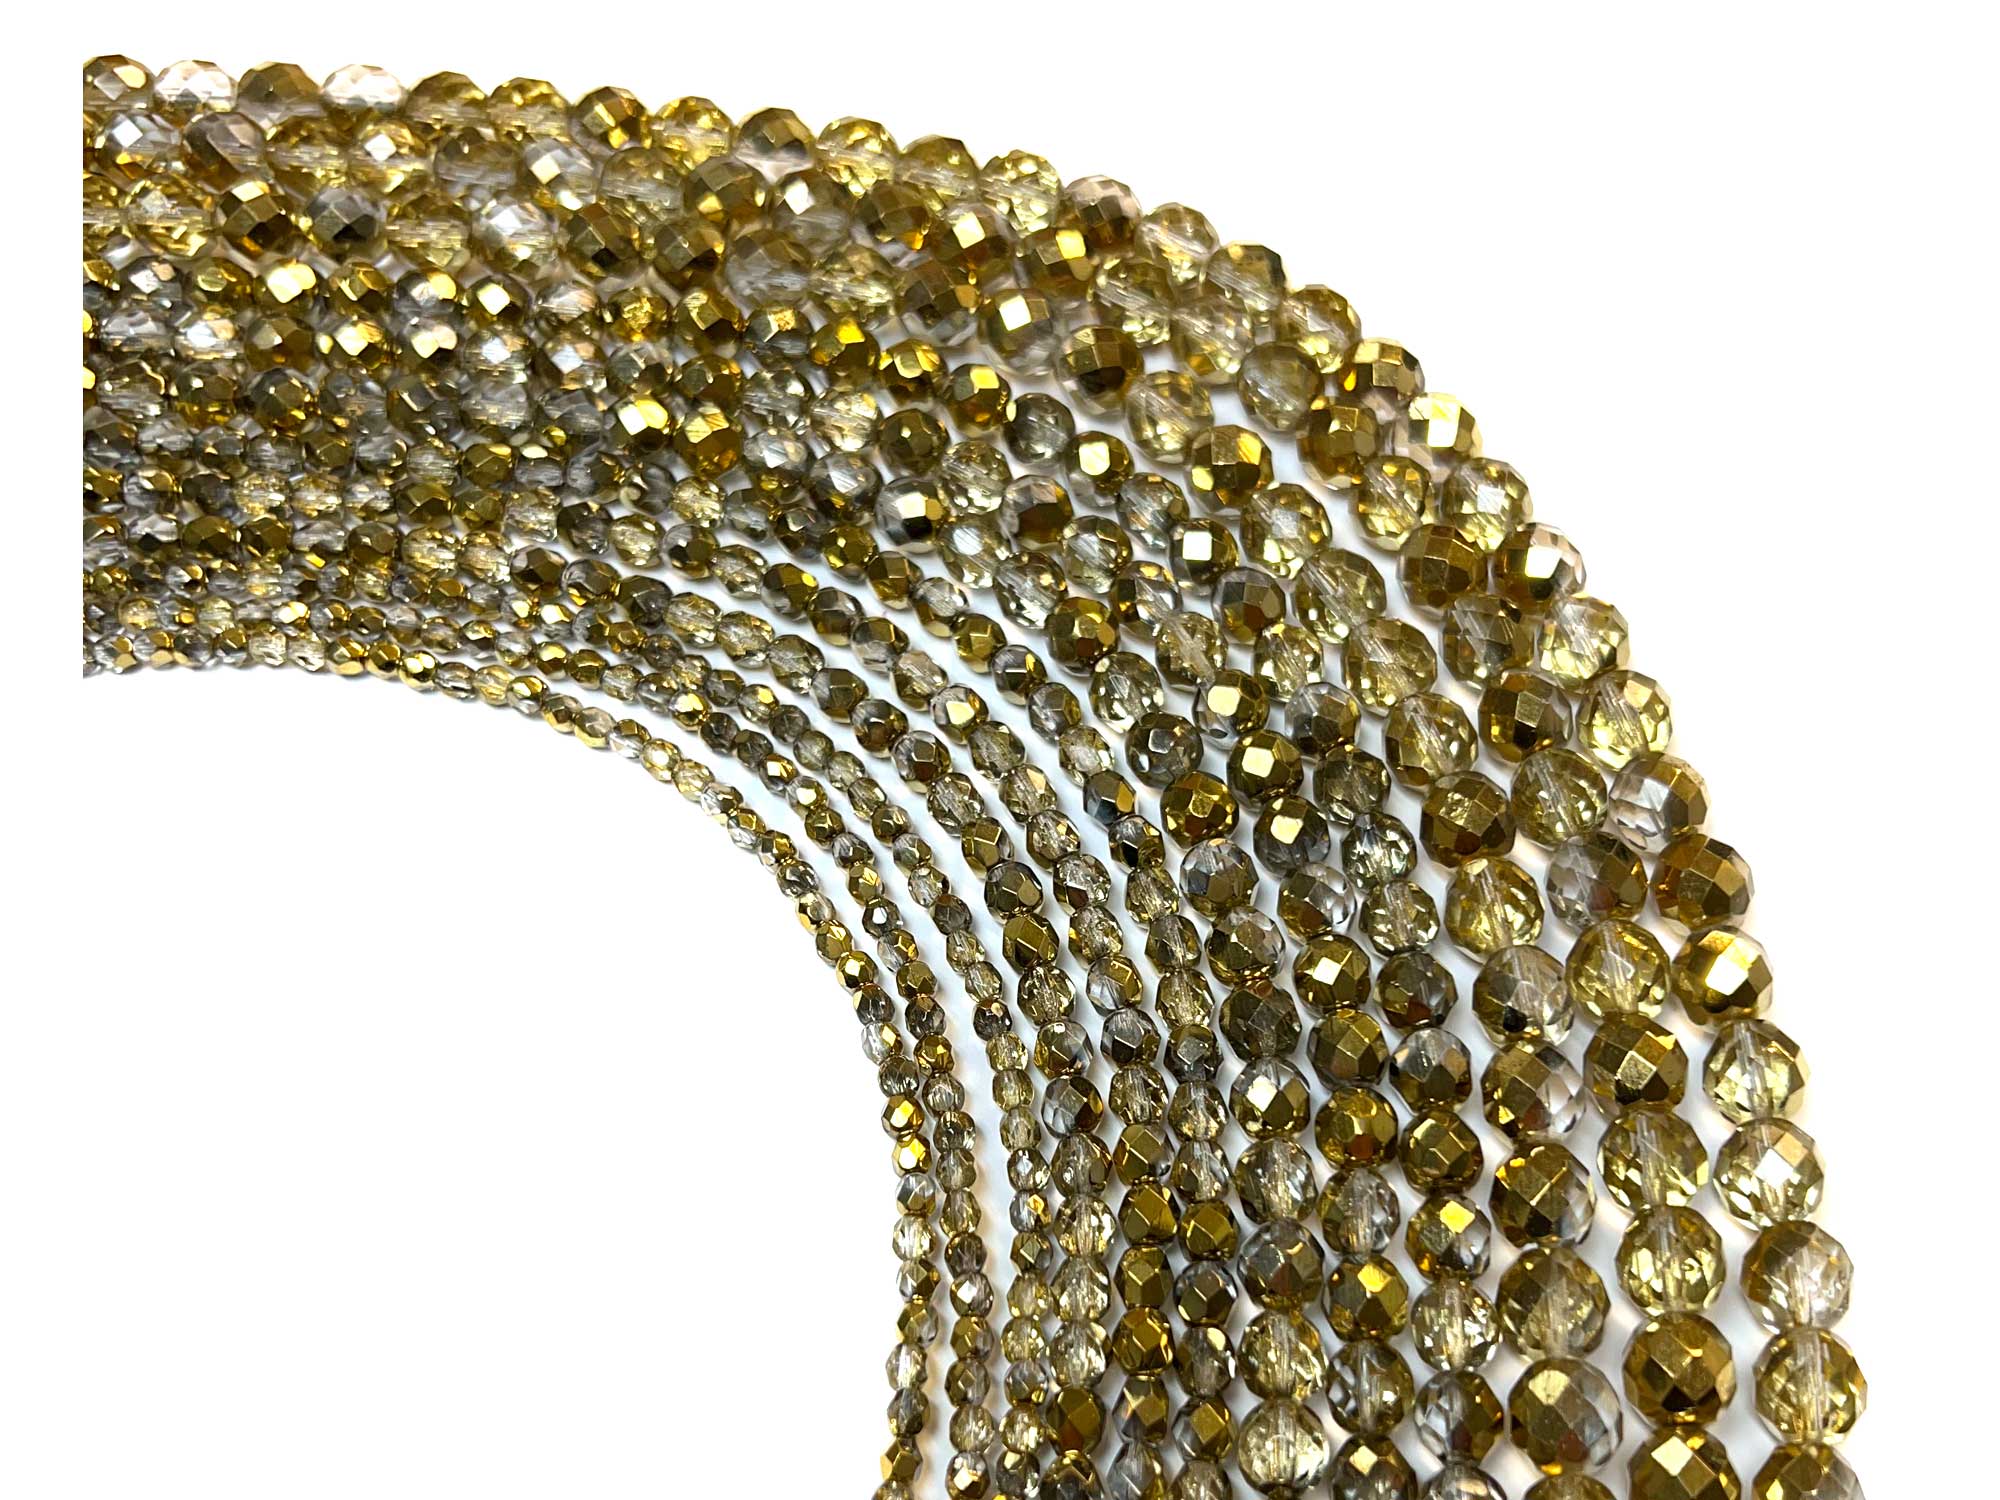 Crystal Amber Aureate 2-sided Gold coated, loose Czech Fire Polished Round Faceted Glass Beads, size 3mm, 6mm